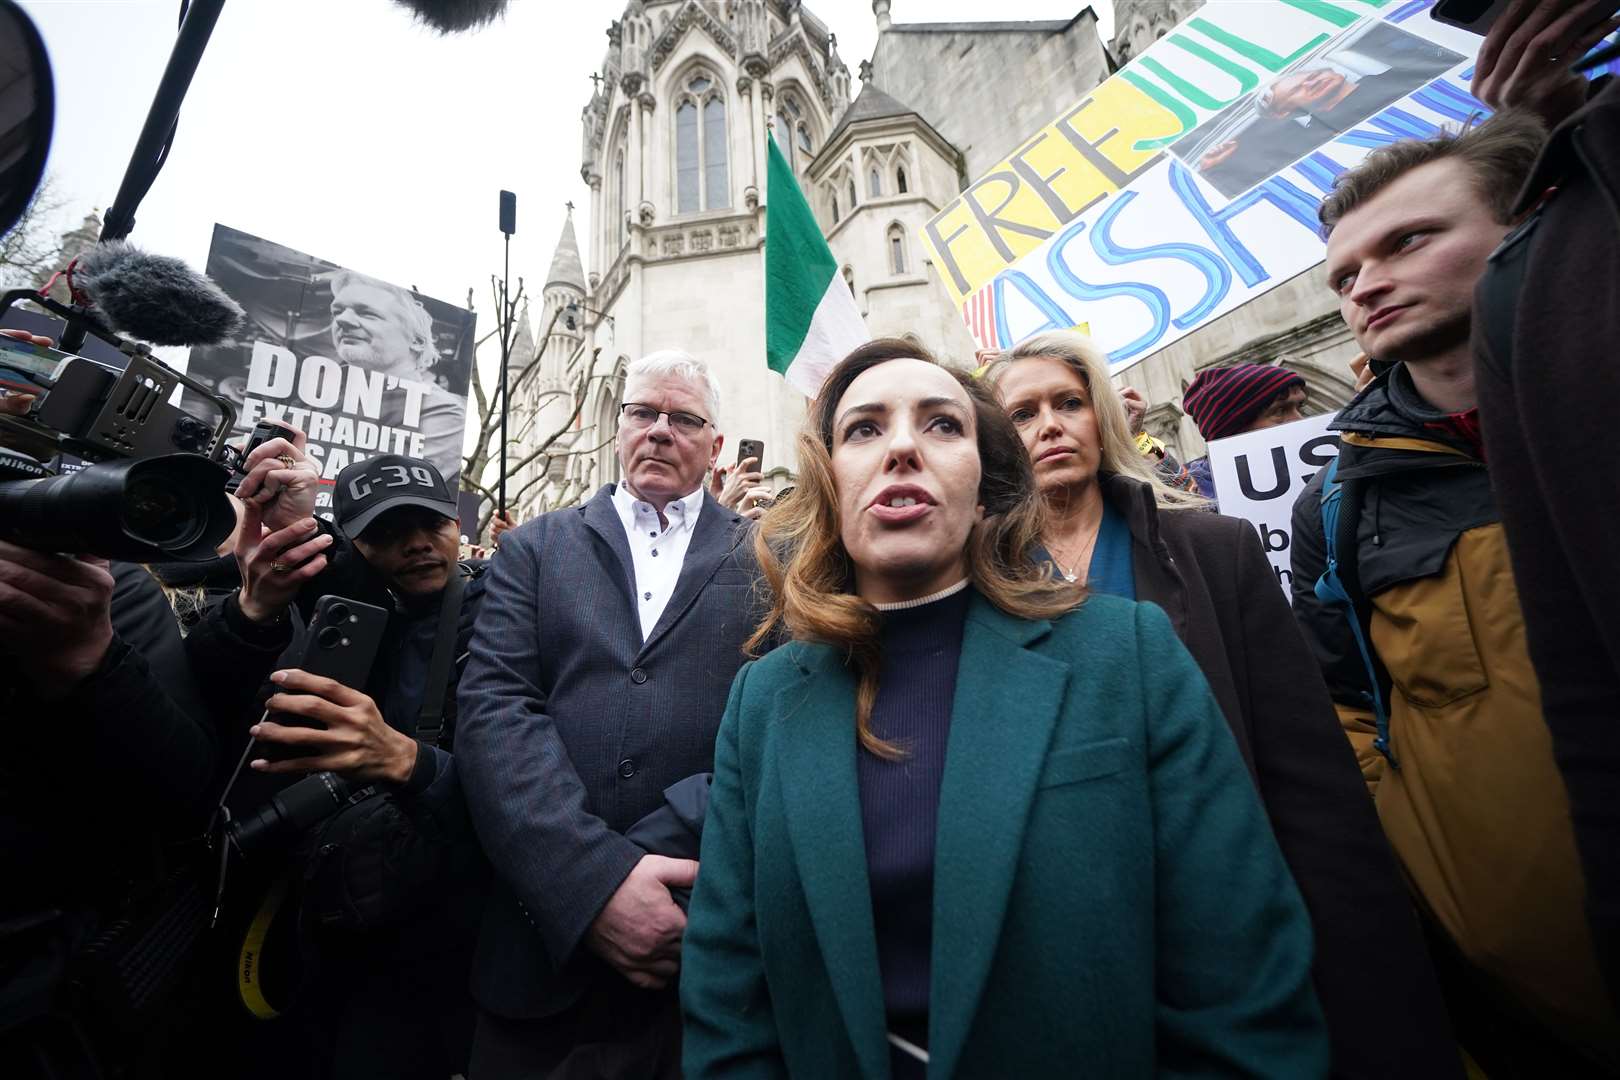 Stella Assange, the wife of Julian Assange, arrives at the Royal Courts Of Justice in London, ahead of a two-day hearing in the extradition case of WikiLeaks founder Julian Assange (Yui Mok/PA)